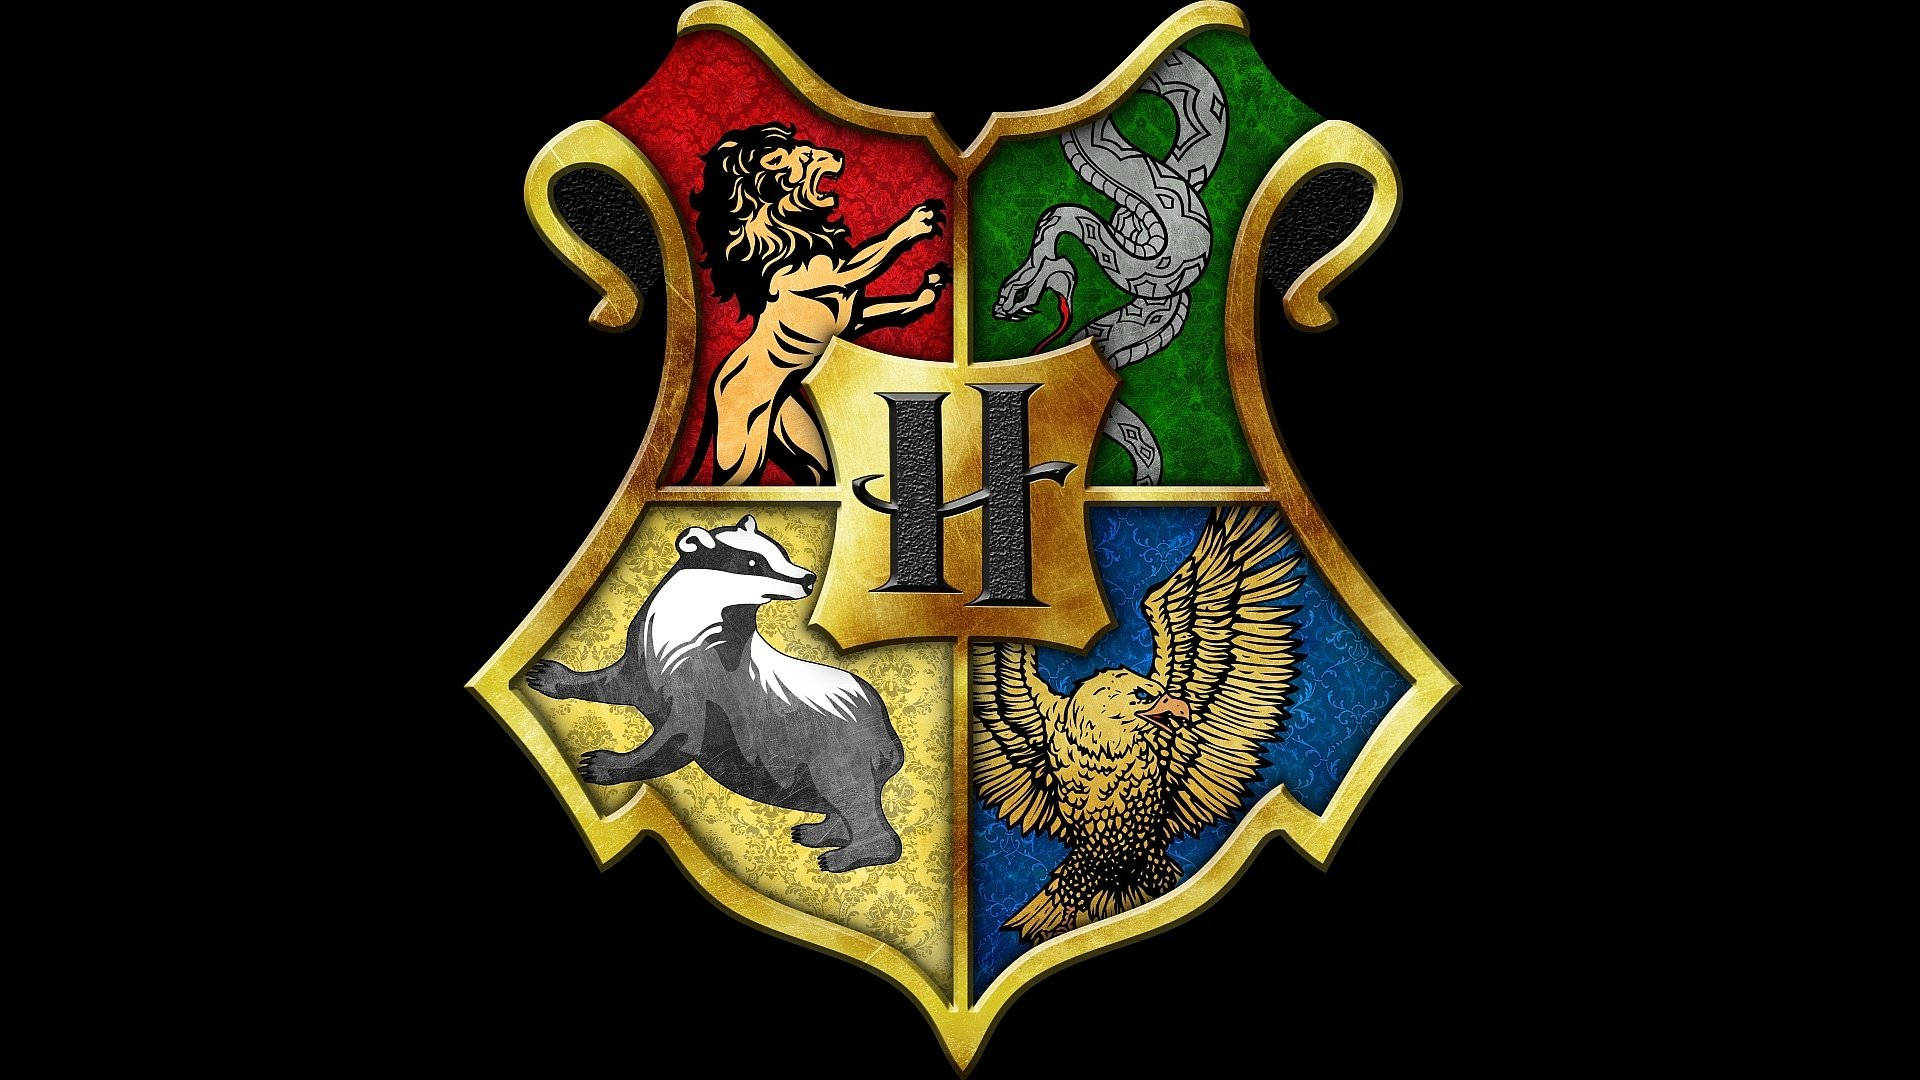 Free Harry Potter Houses Wallpaper Downloads, [100+] Harry Potter Houses  Wallpapers for FREE 